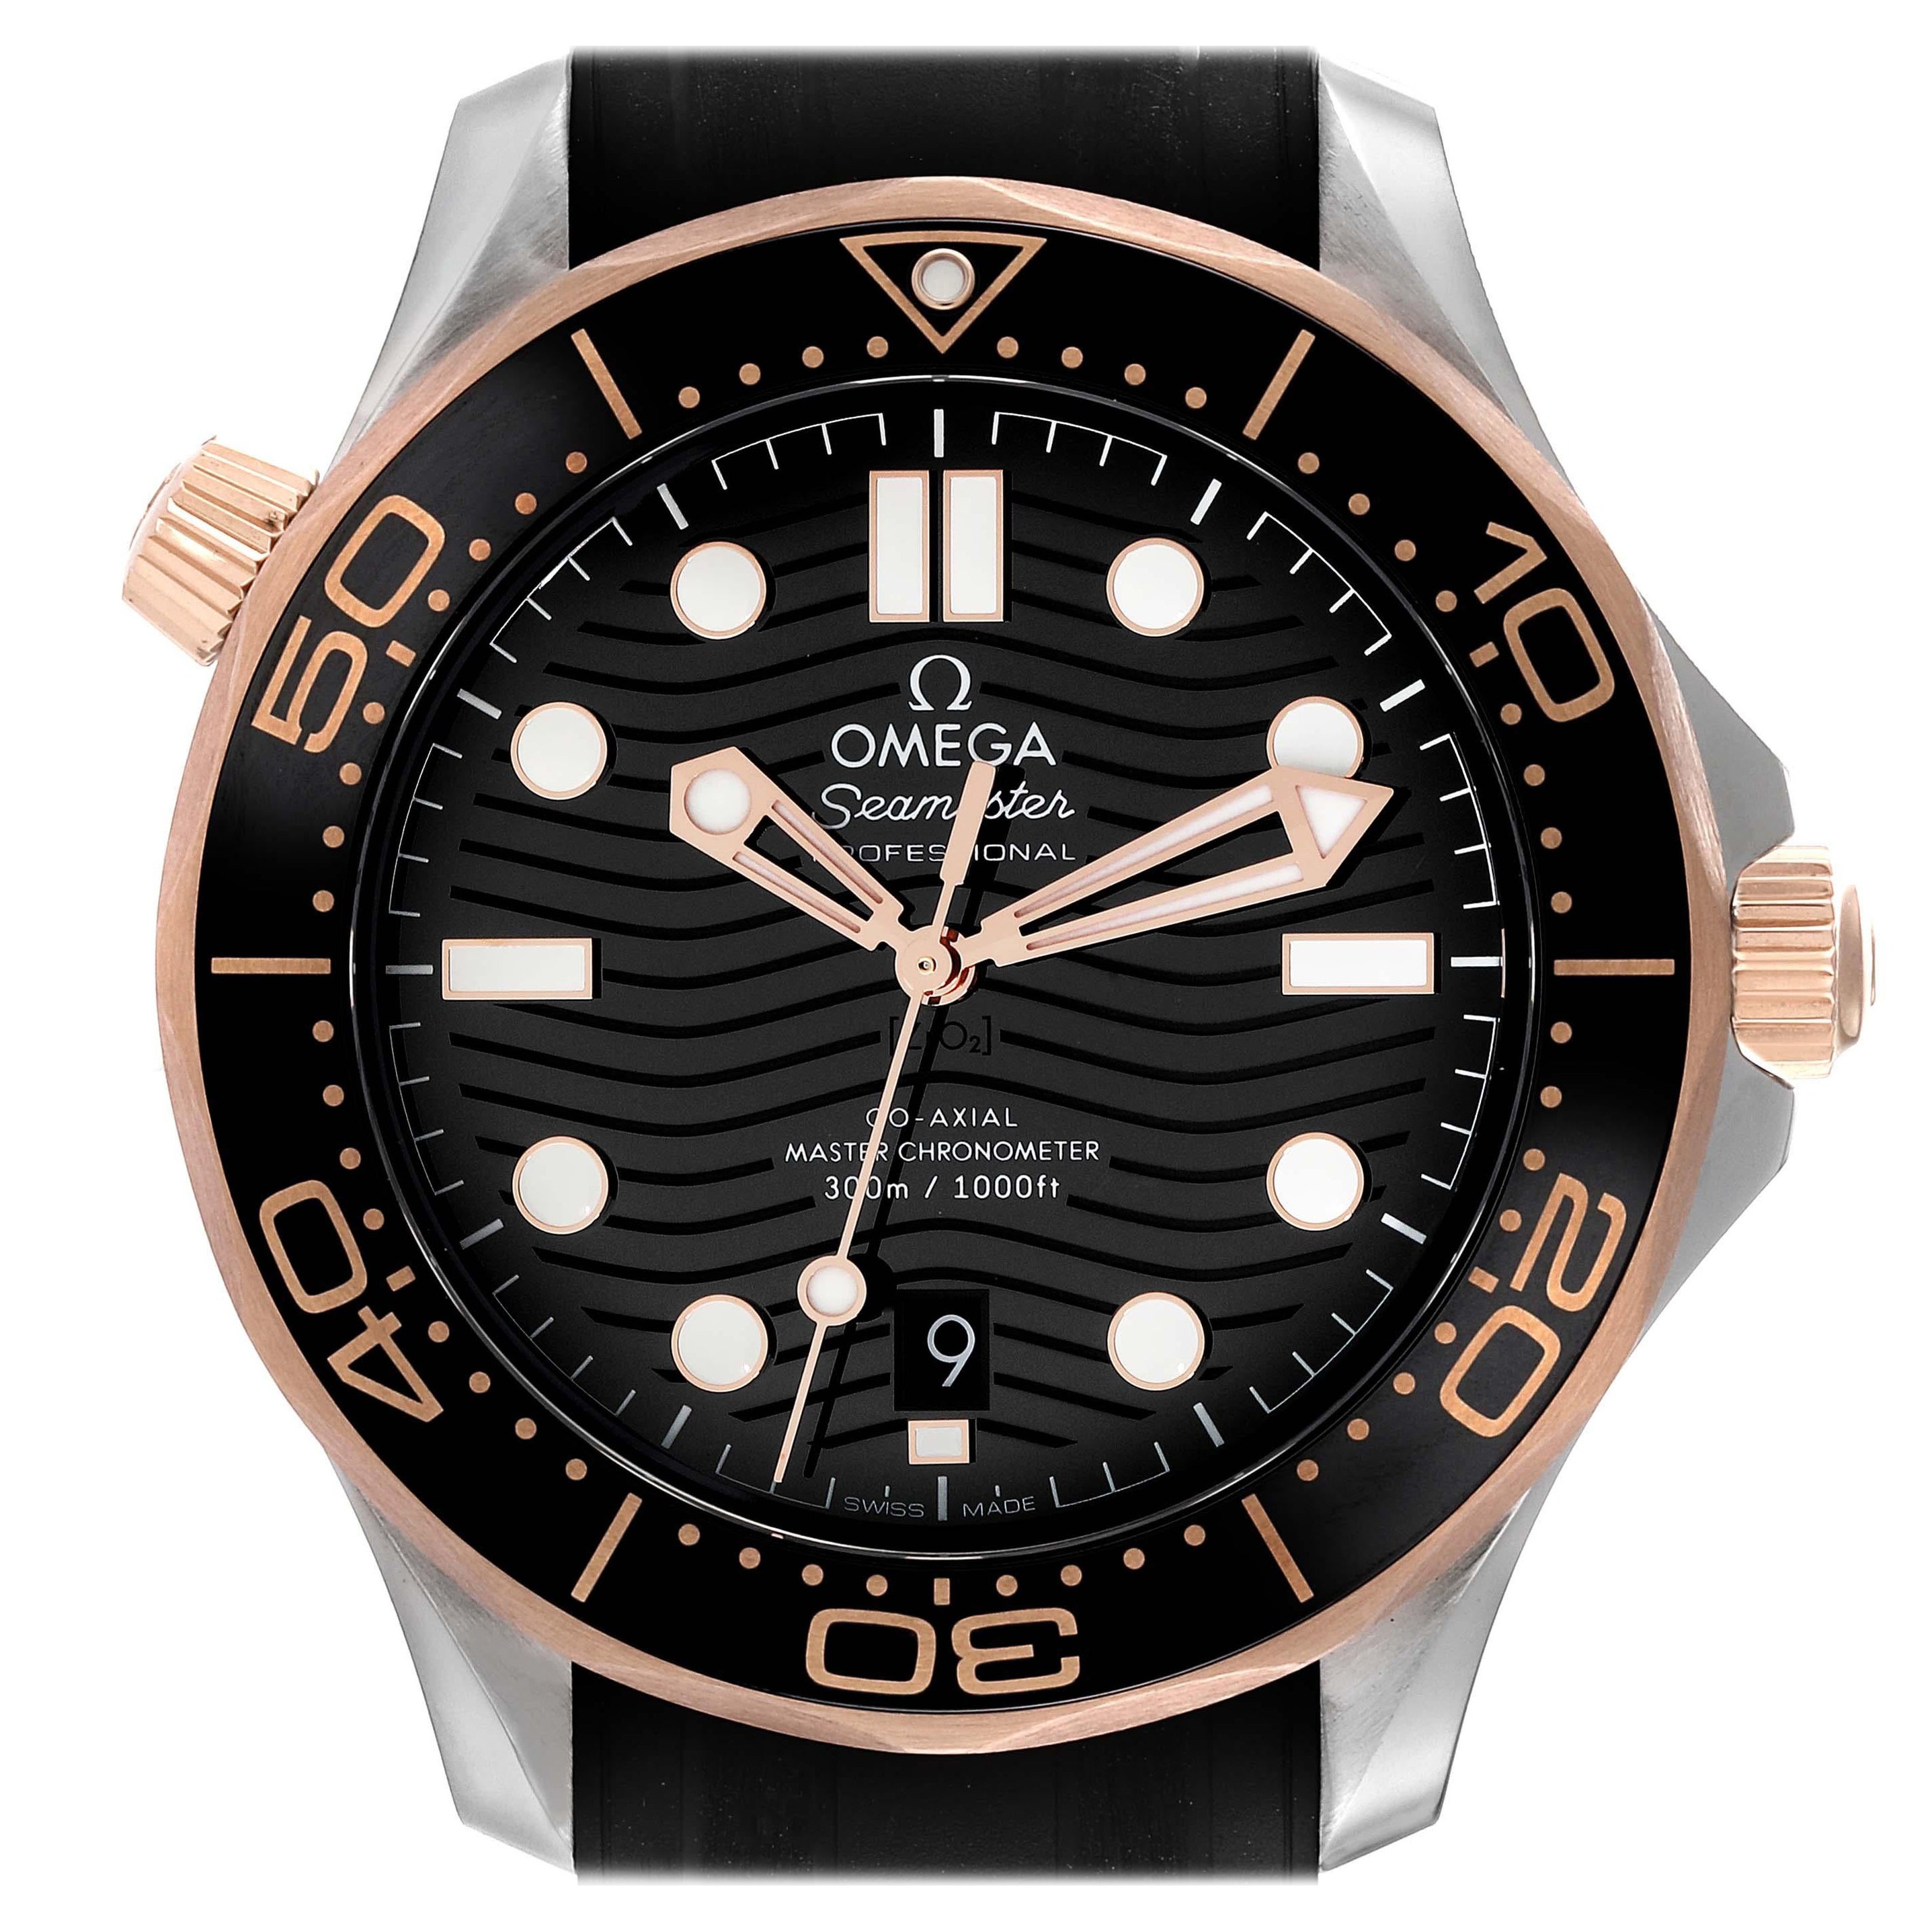 Omega Seamaster Diver Steel Rose Gold Mens Watch 210.22.42.20.01.002 Box Card For Sale